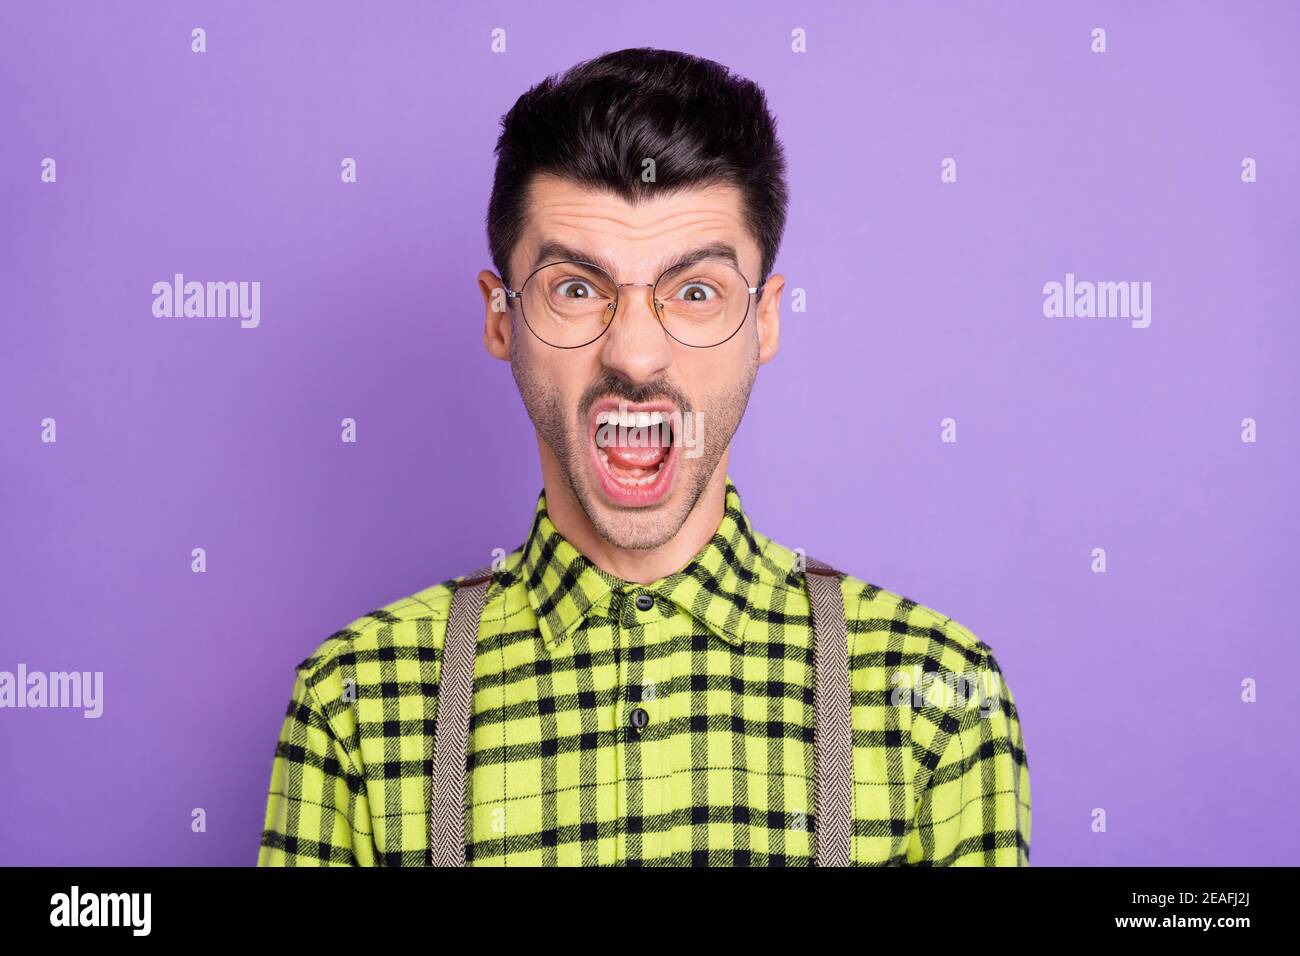 Photo portrait of enraged screaming man isolated on vivid violet colored background Stock Photo